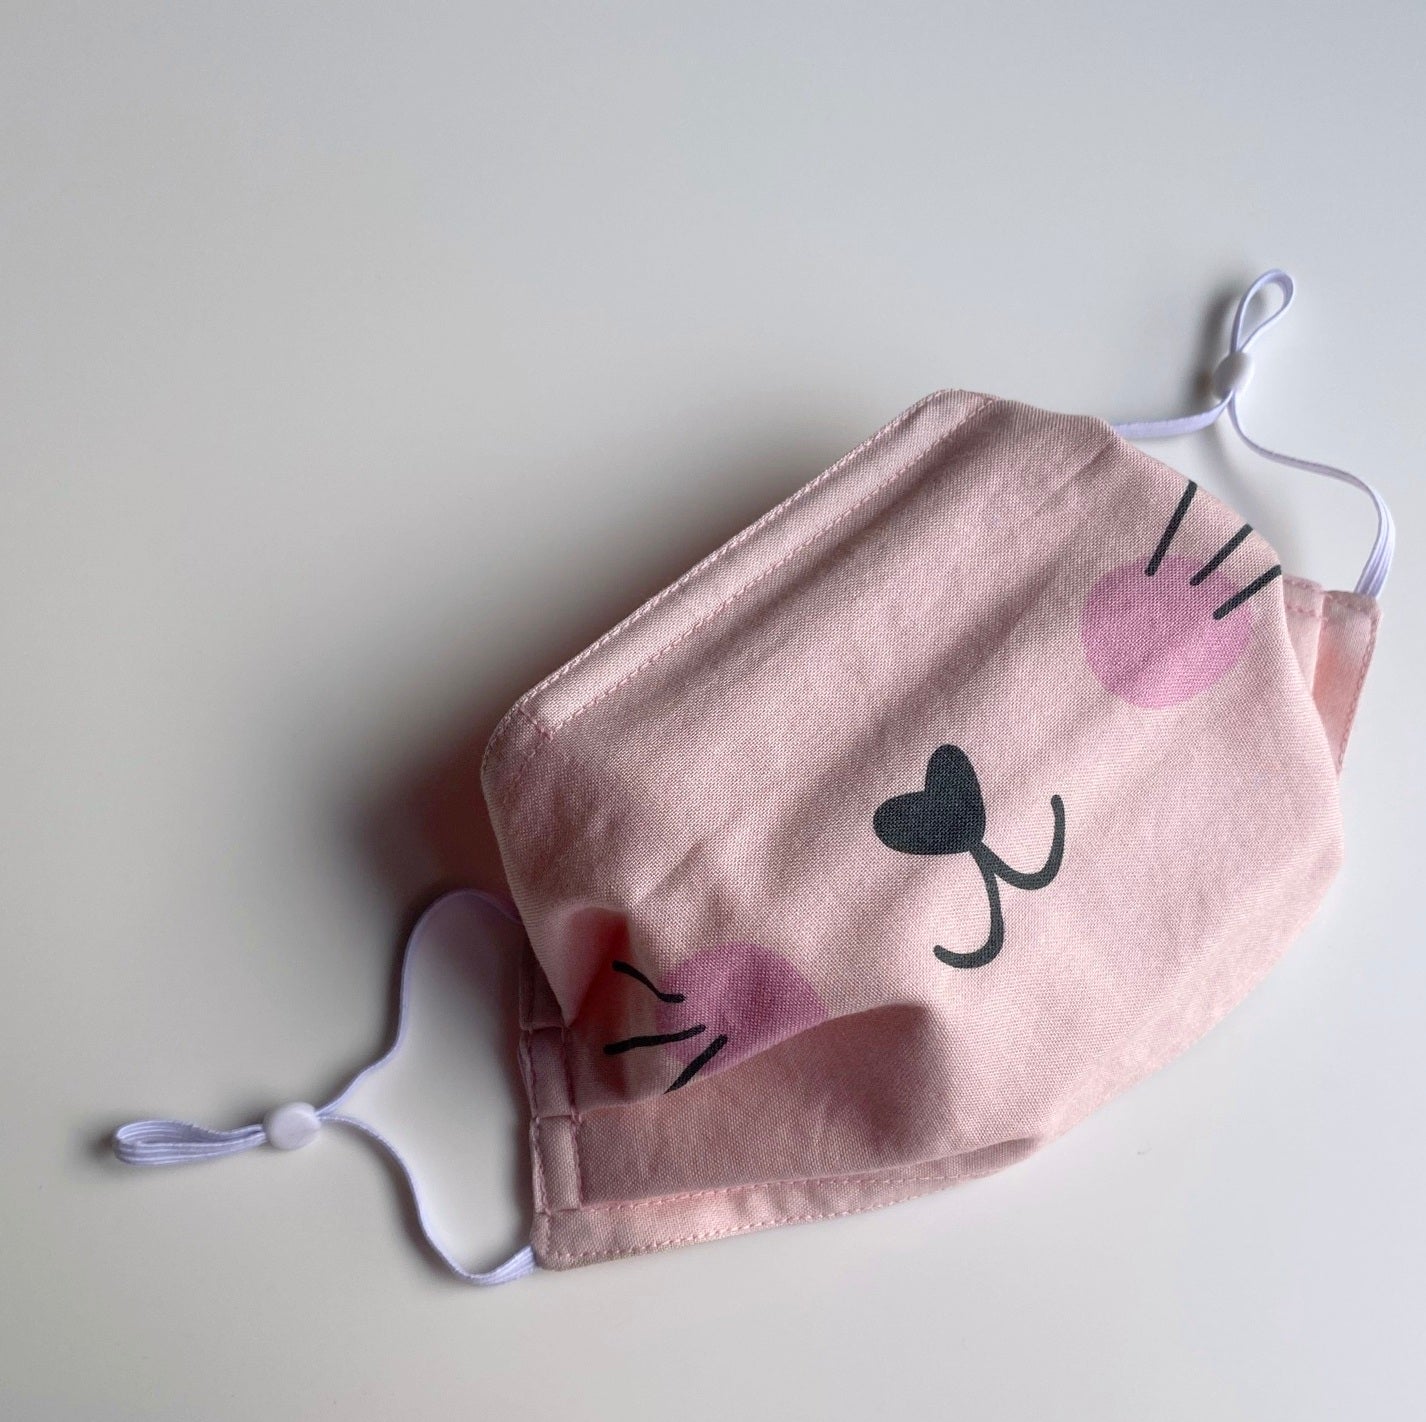 PRE-PRINTED Cotton Face Mask - PINK KITTEN